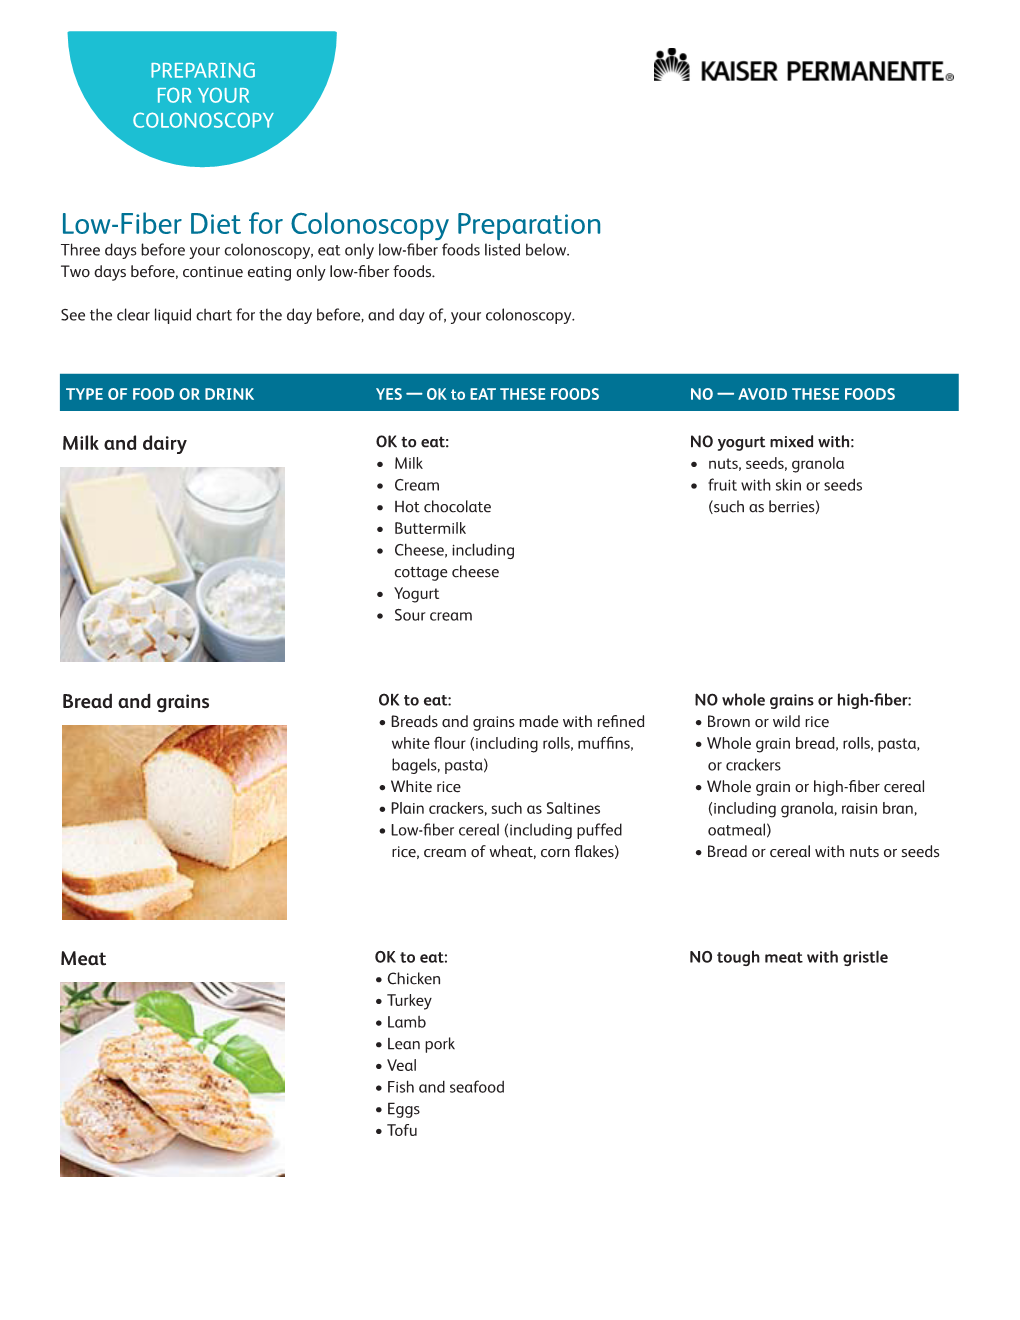 Low-Fiber Diet for Colonoscopy Preparation Three Days Before Your Colonoscopy, Eat Only Low-ﬁber Foods Listed Below